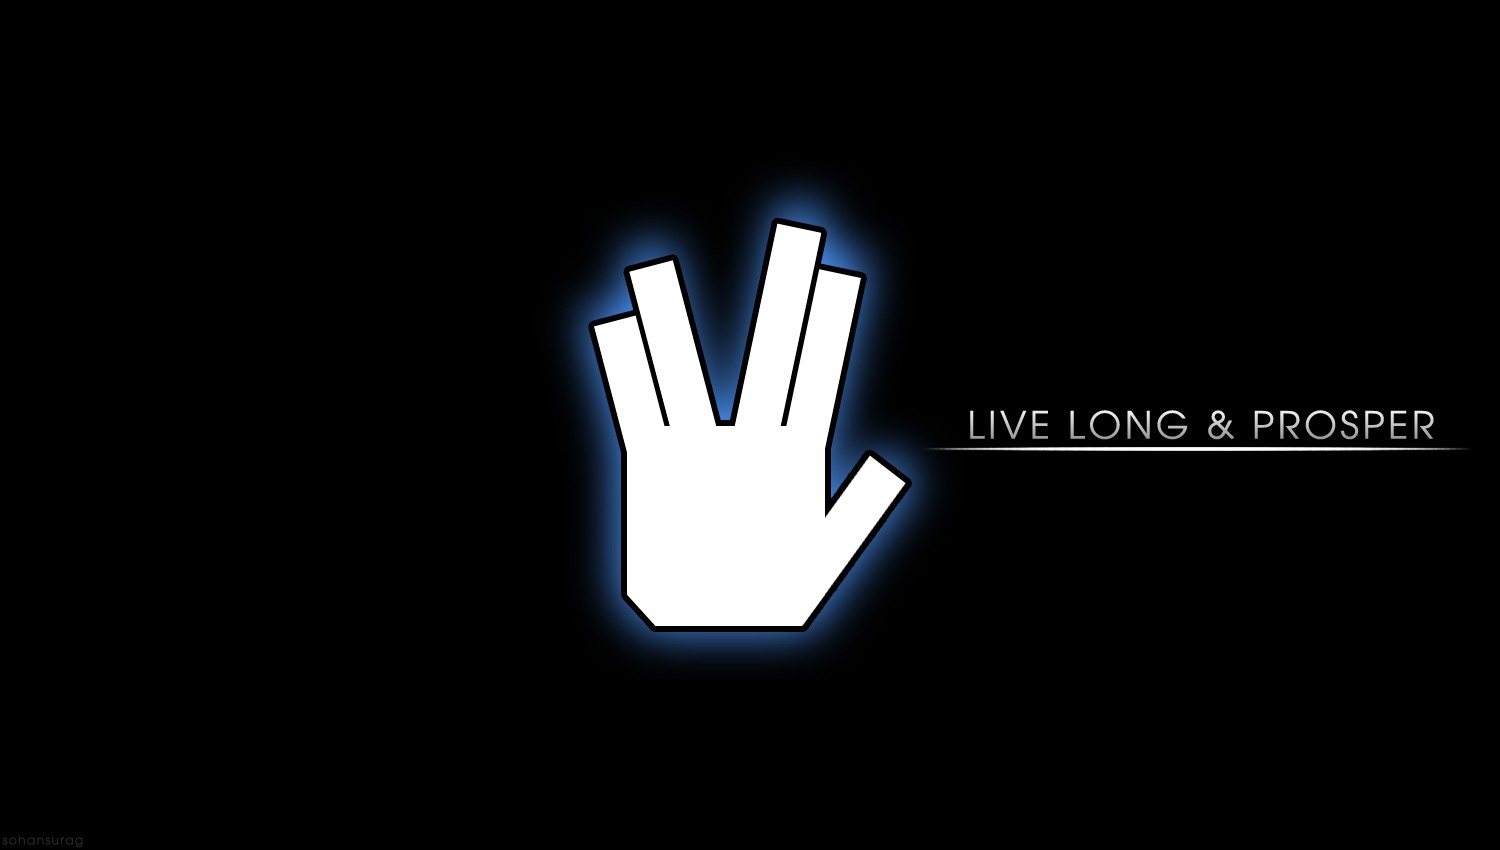 General 1500x850 Star Trek Live Long And Prosper minimalism science fiction hand gesture simple background hands typography TV series movies